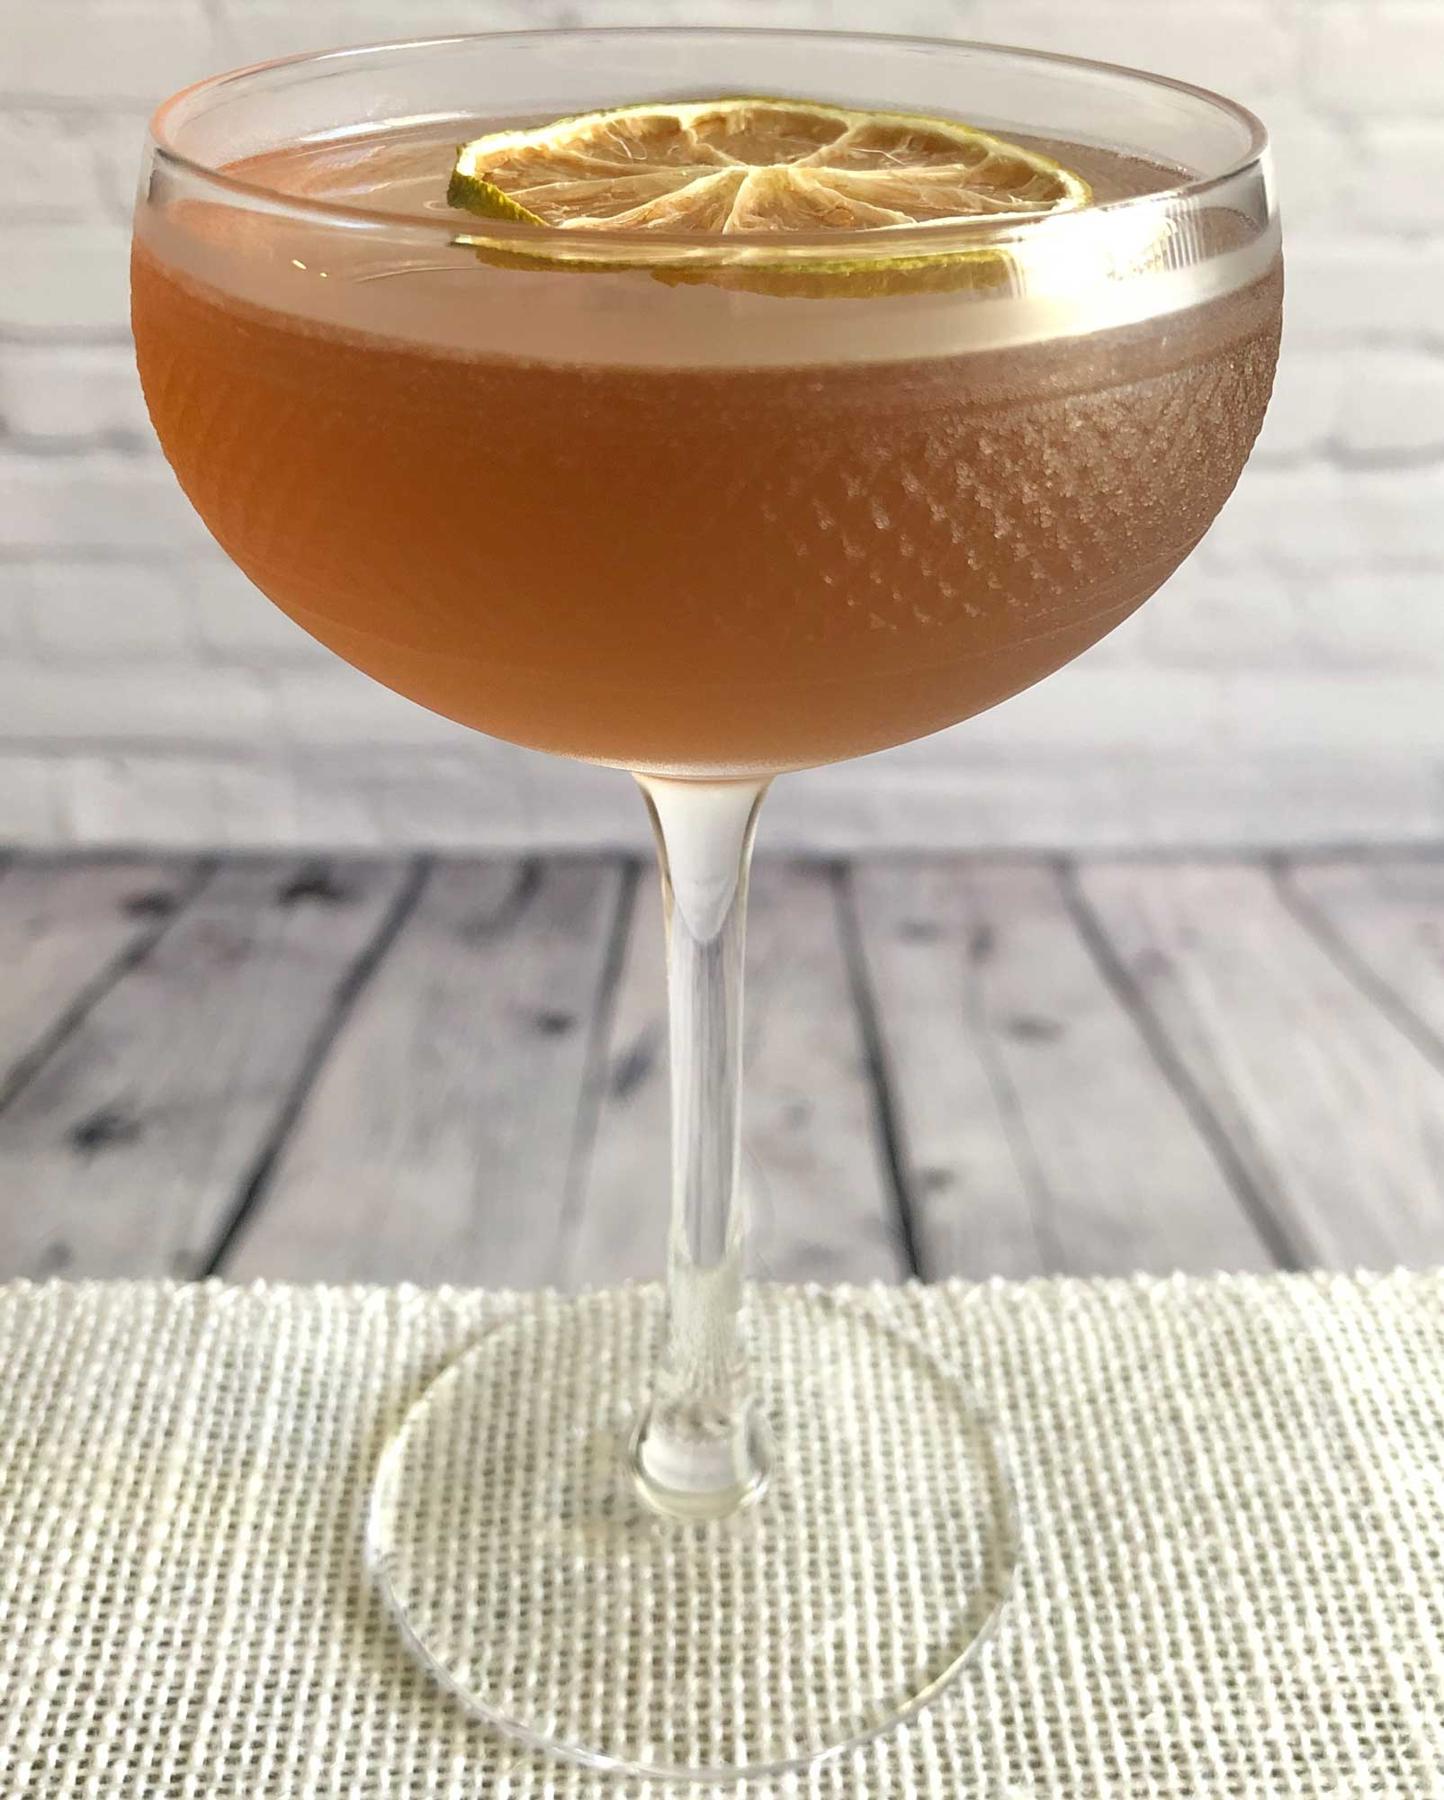 An example of the Daytime Daiquiri, the mixed drink (drink), by Jen Davis, The Eddy, Providence, Rhode Island, featuring Dolin Rouge Vermouth de Chambéry, lime juice, simple syrup, and light rum; photo by Lee Edwards